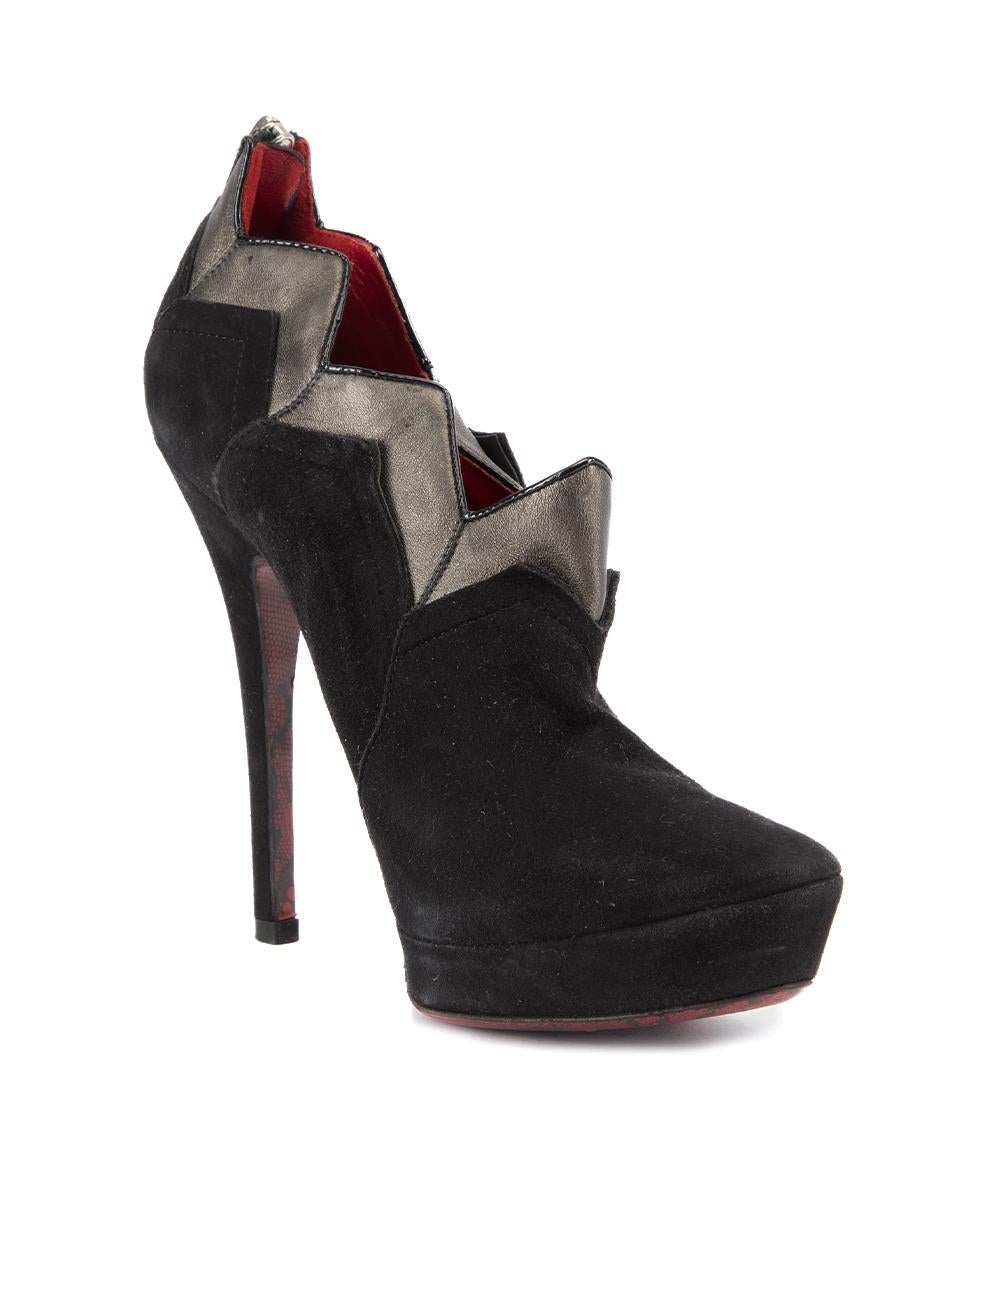 CONDITION is Very good. Hardly any visible wear to boots is evident on this uses Cesare Paciotti Details Black Suede Almond toe Platform high heel Zig zag cut out design Back zip closure Made in Italy Composition Exterior: Suede Interior: Leather